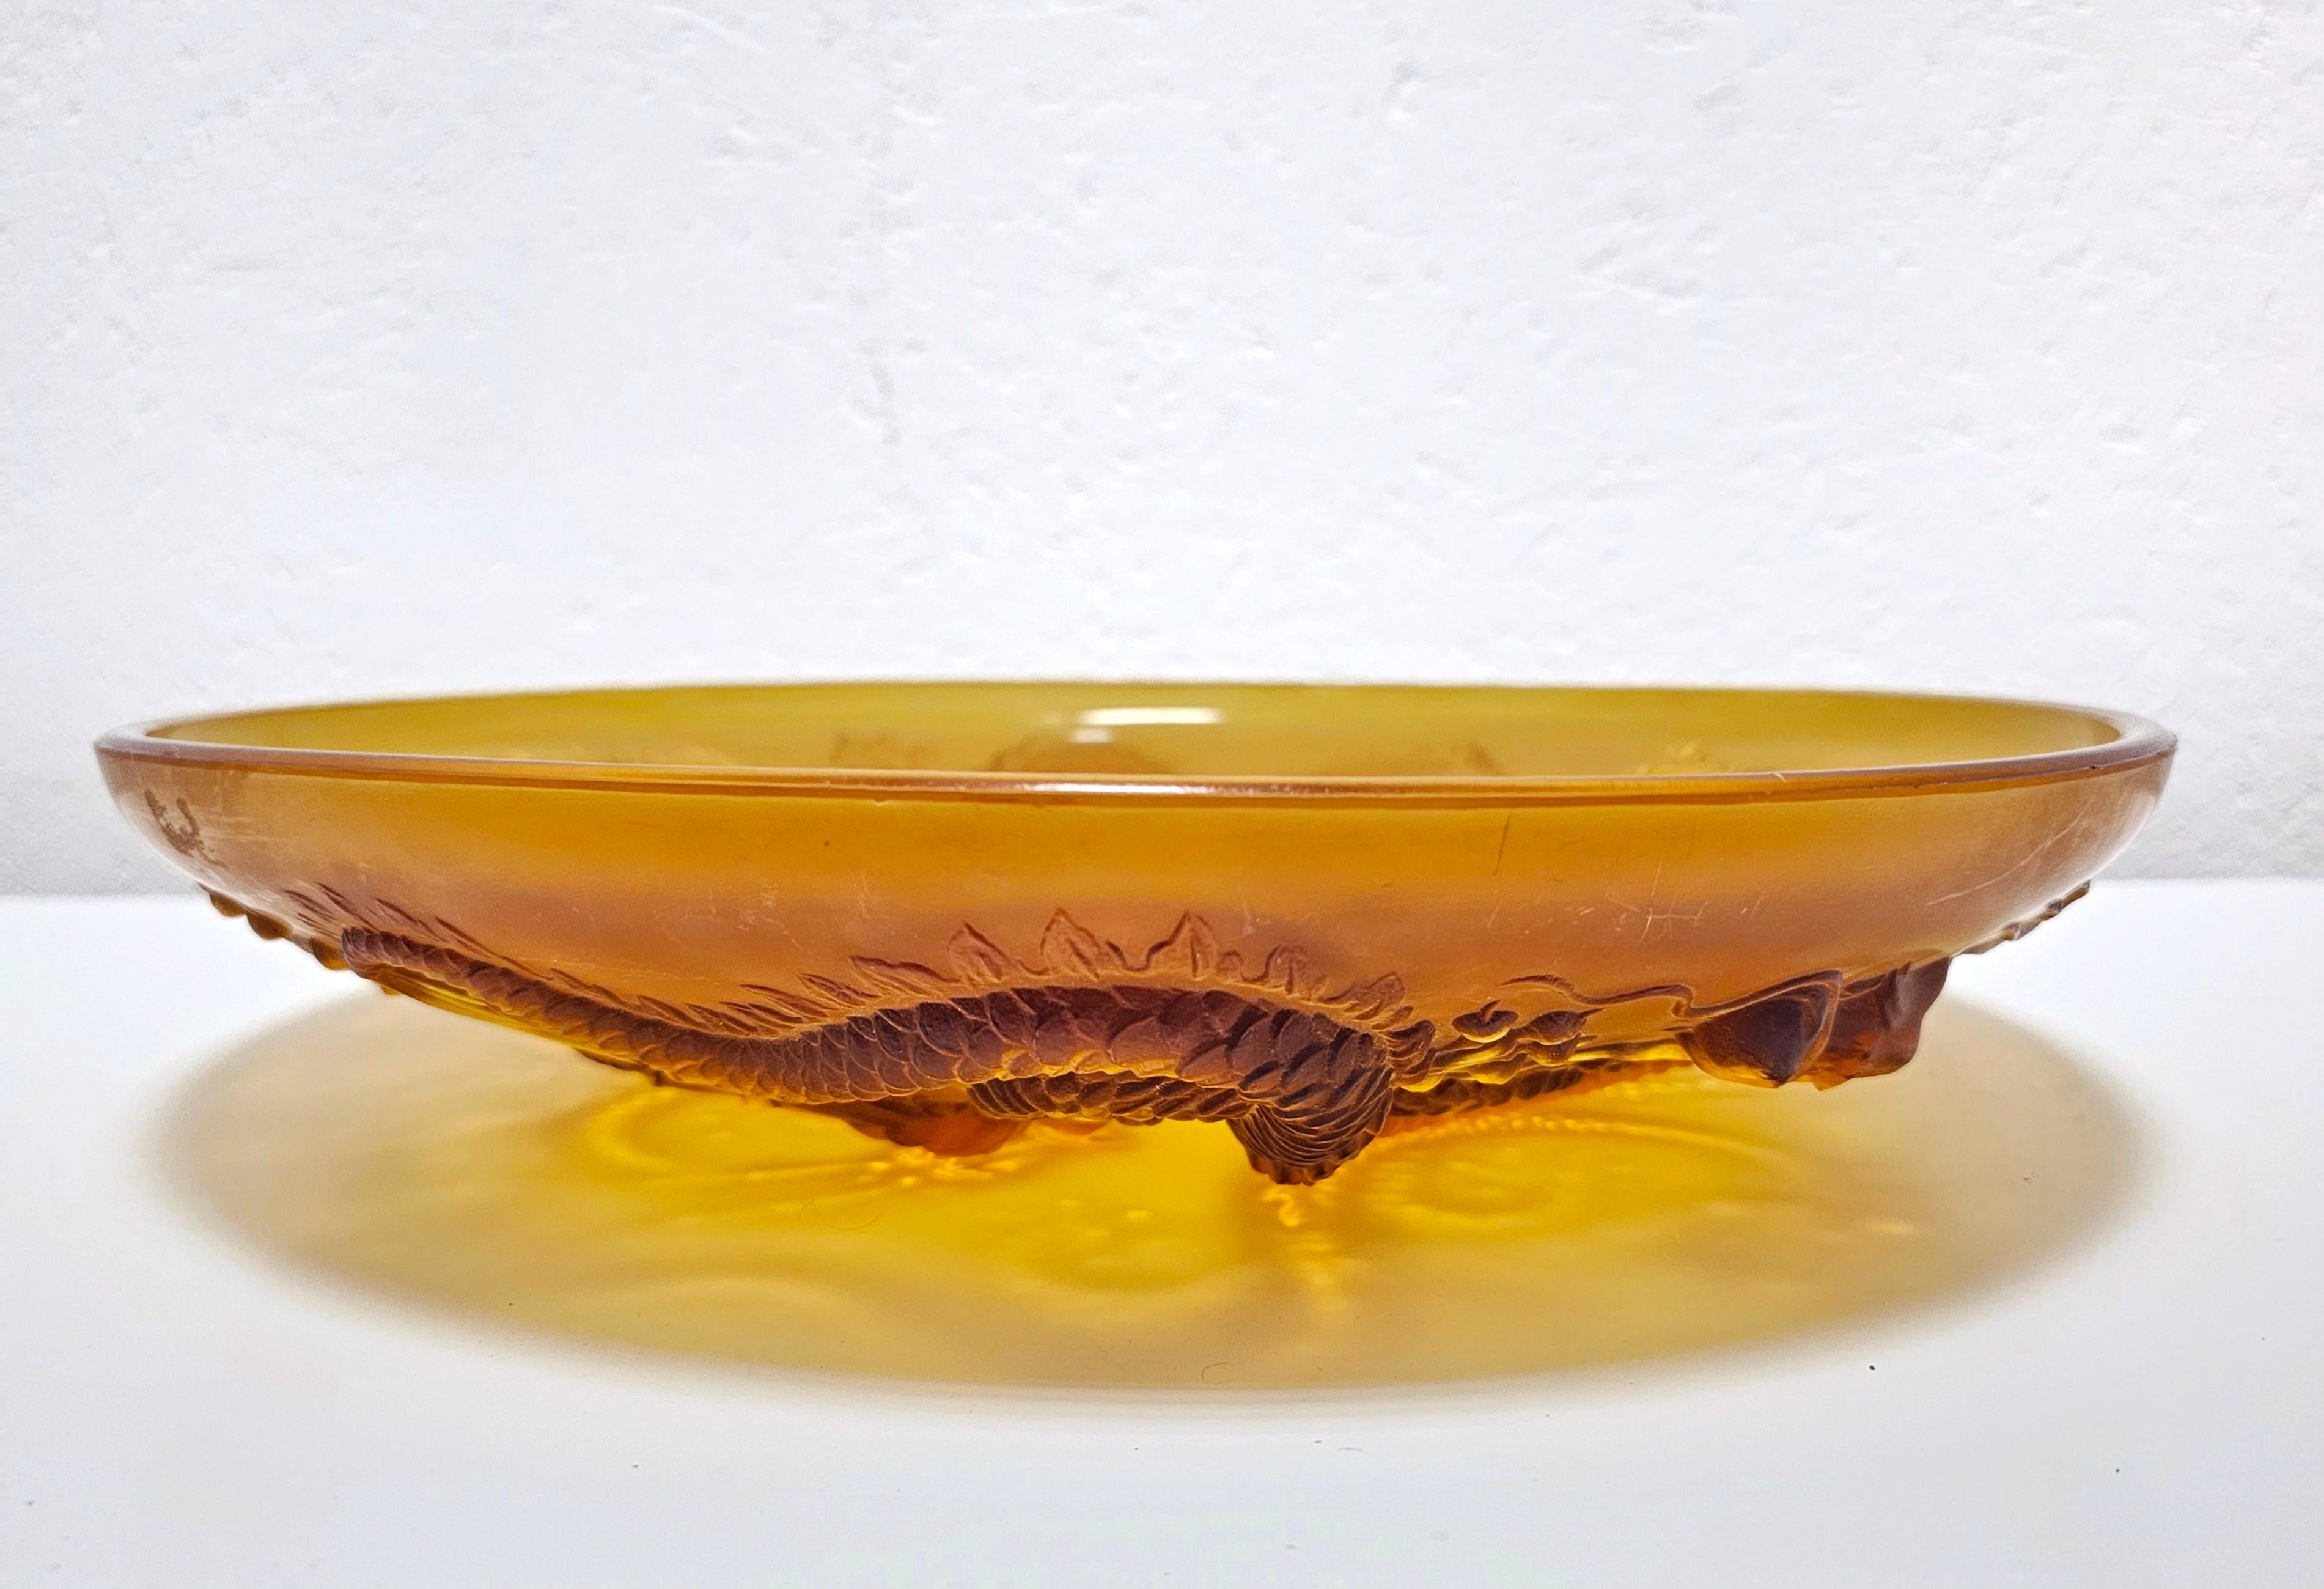 Art Deco Golden Dragon Glass Centerpiece or Bowl designed by Josef Inwald, 1930s For Sale 2